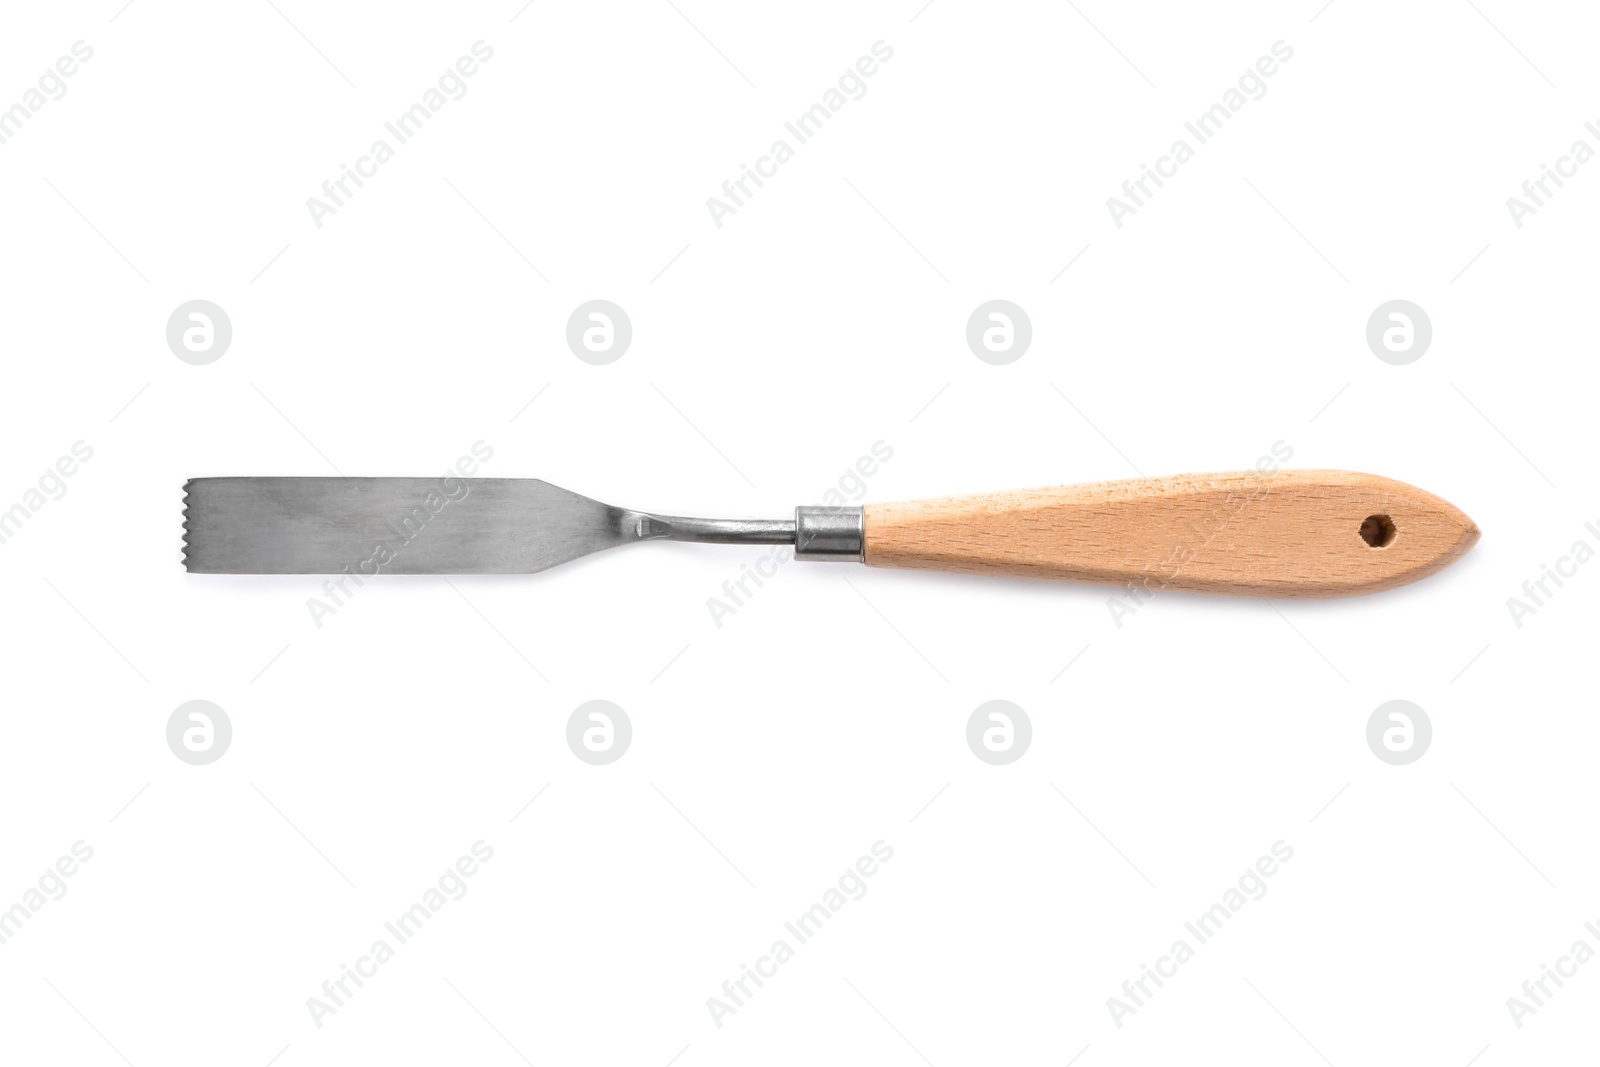 Photo of Skiving knife for leather working isolated on white, top view